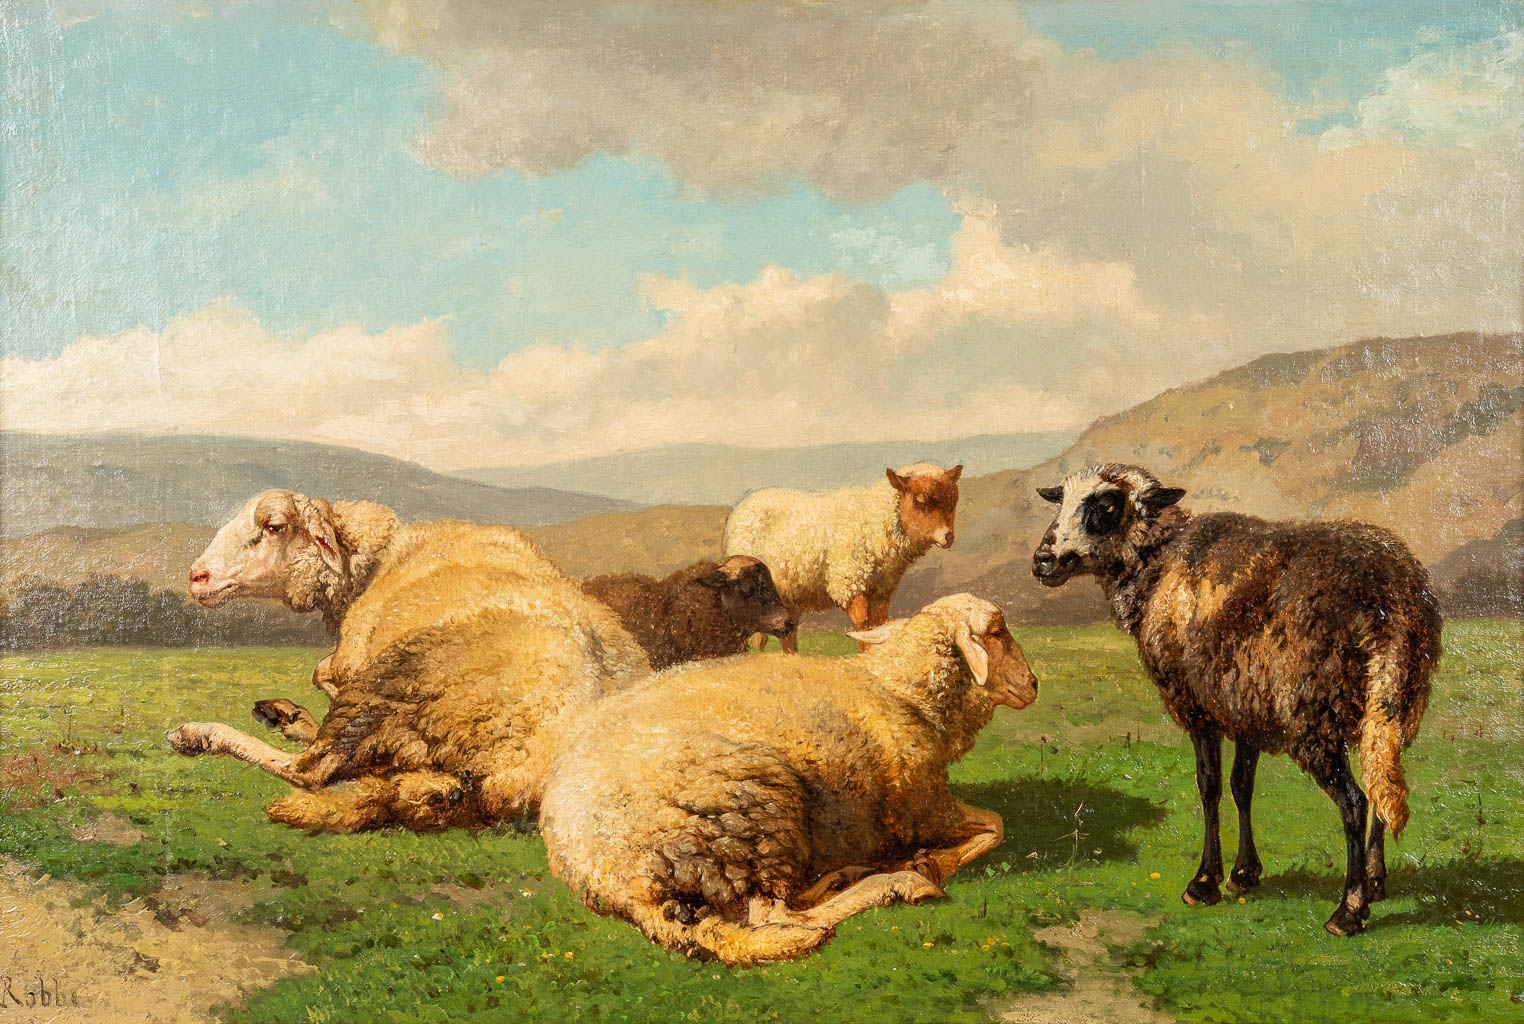 Louis ROBBE (1806-1887) 'The Black Sheep' a painting, oil on canvas. (W:70 x H:46 cm)